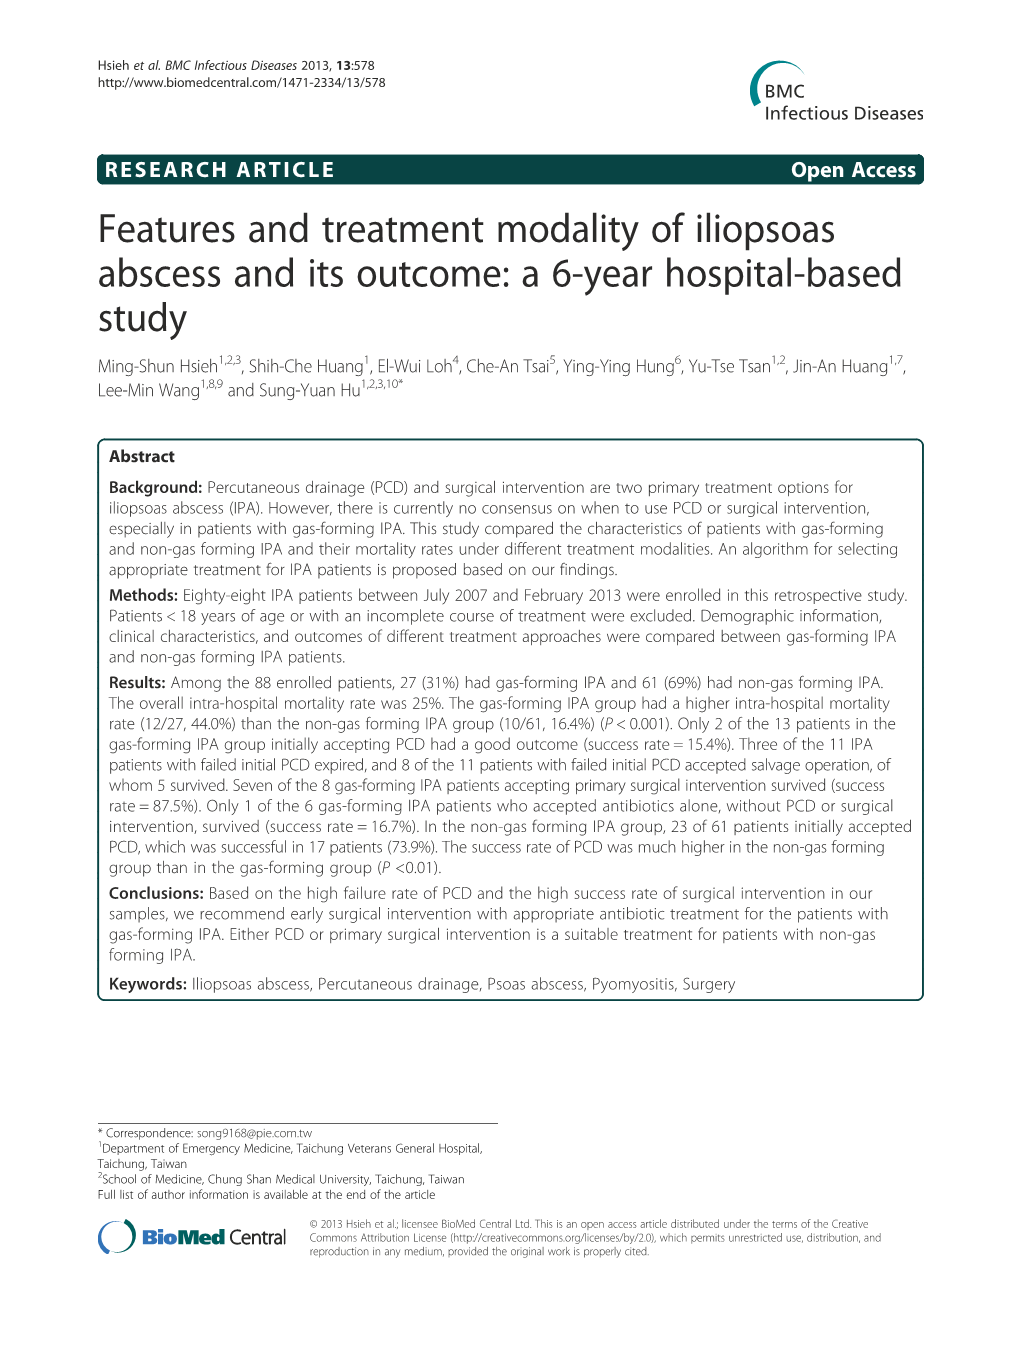 Features and Treatment Modality of Iliopsoas Abscess and Its Outcome